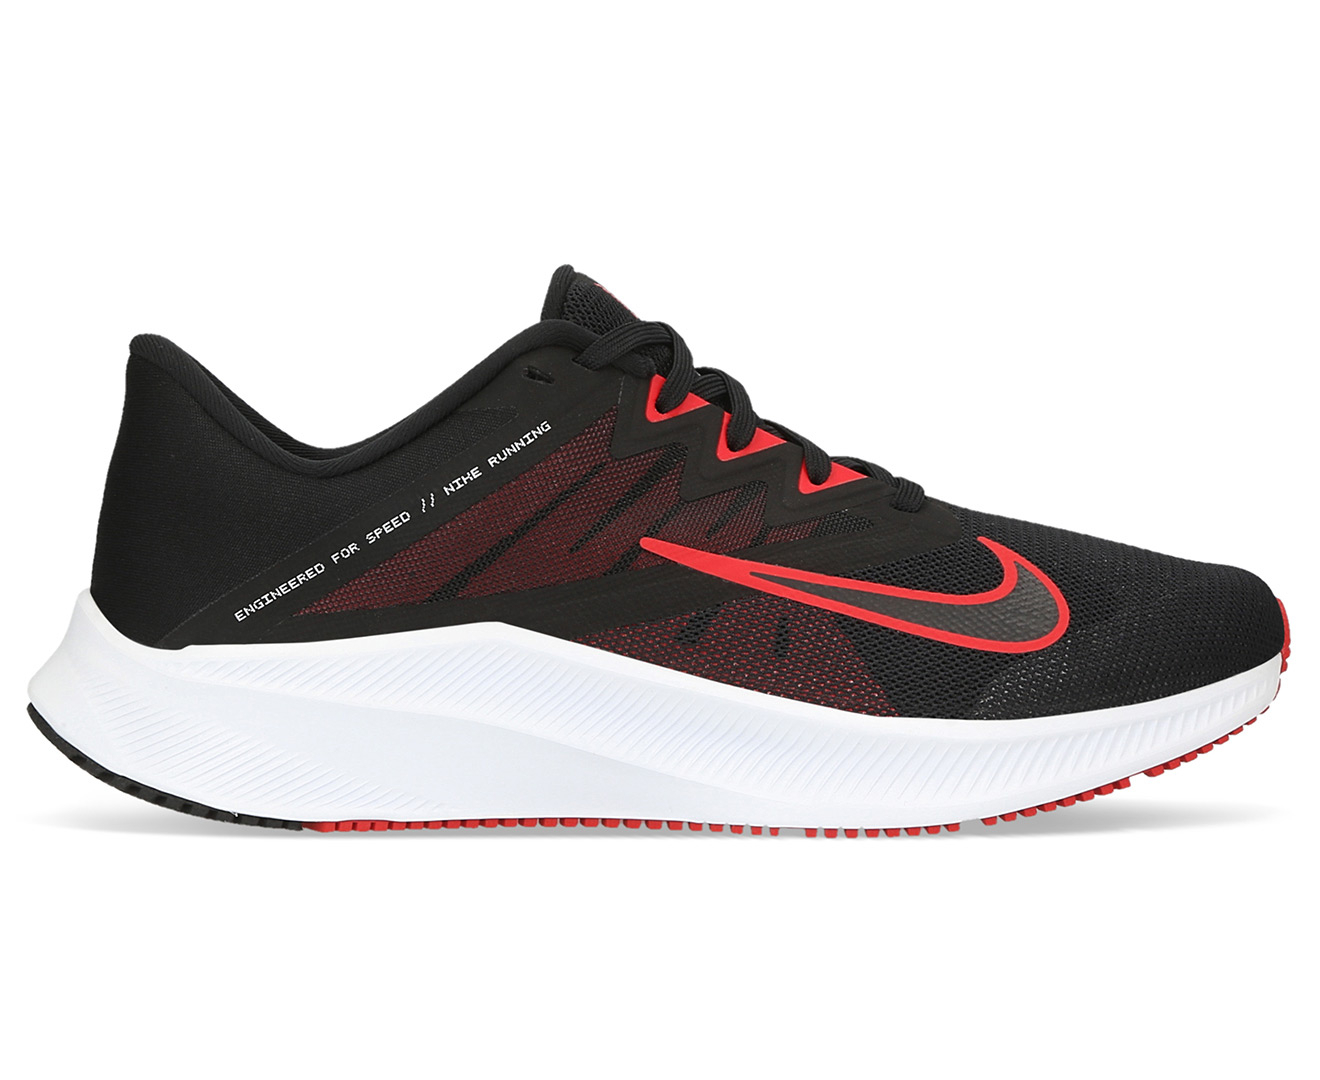 Nike Men's Quest 3 Running Shoes - Black/Red/White | Catch.co.nz